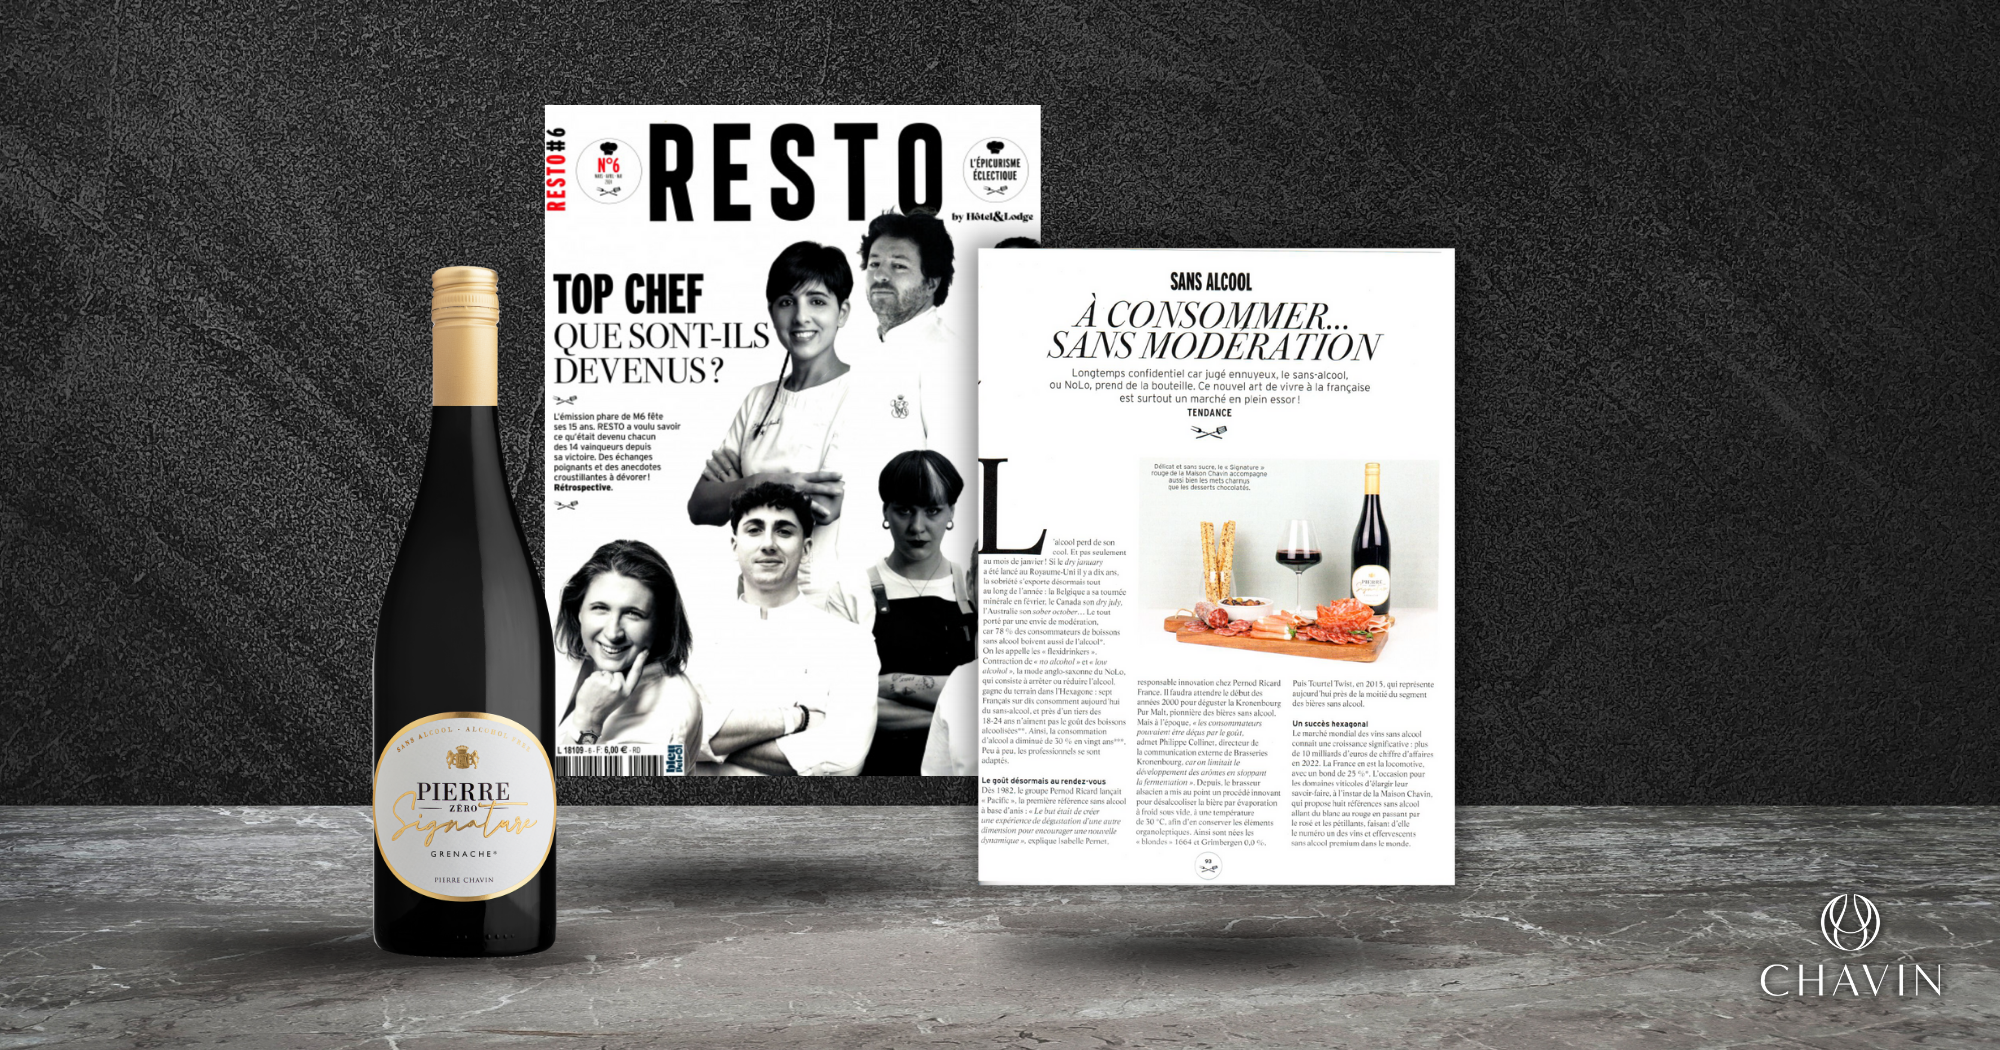 Chavin - Chavin Featured in “RESTO” by Hu00f4tel&Lodge Magazine for its Alcohol-Free Offerings